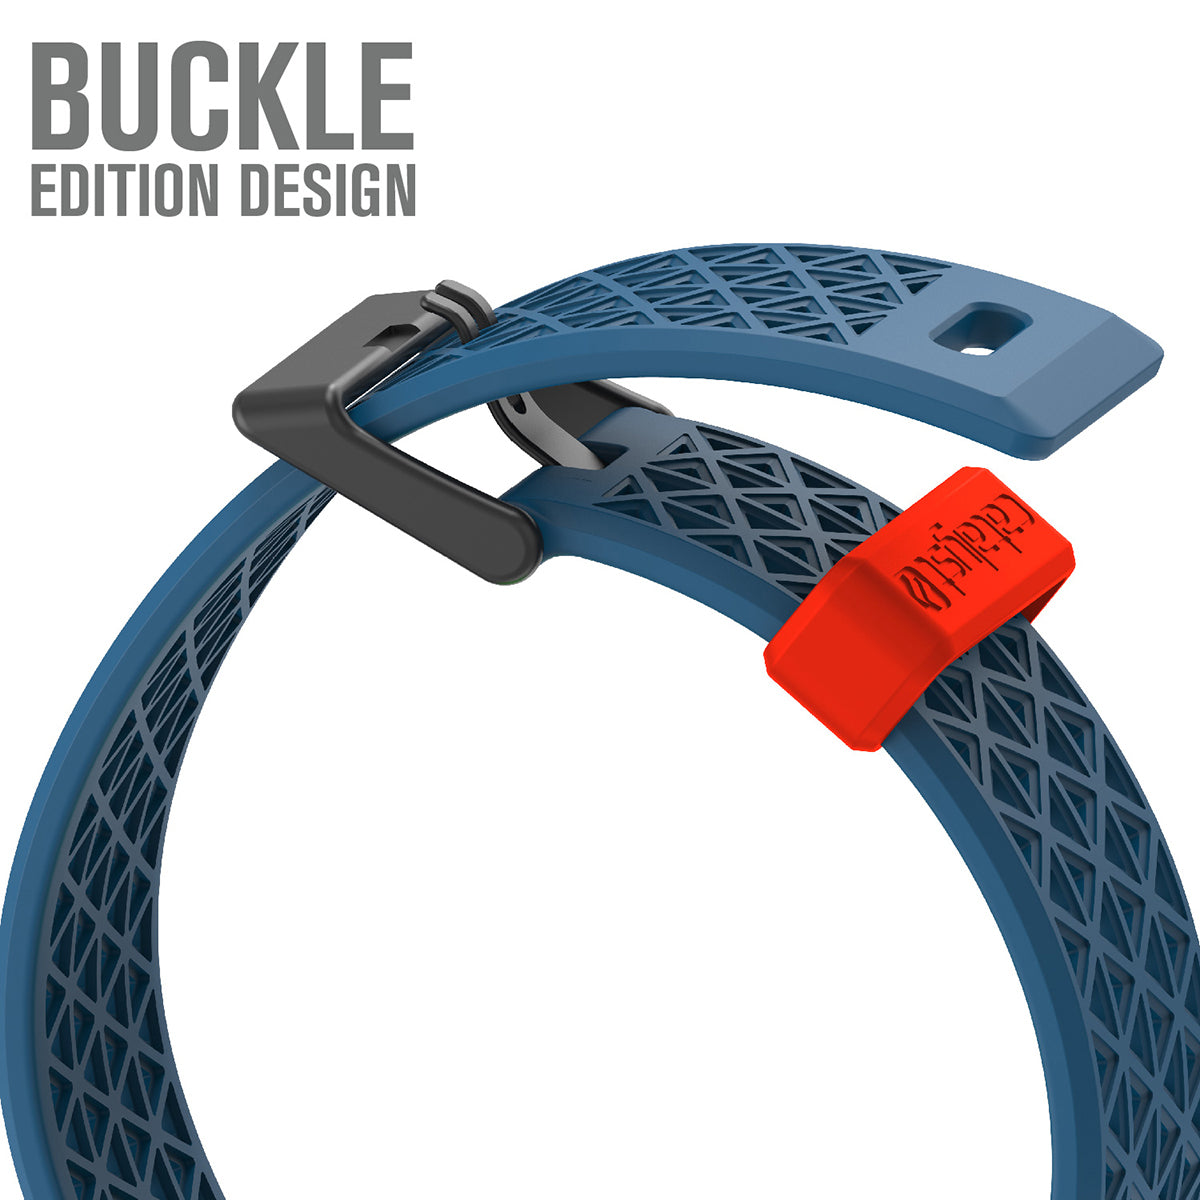 catalyst apple watch series 9 8 7 6 5 4 SE Gen 2 1 38 40 41mm sport band buckle edition showing the buckle edition design blueridge sunset text reads buckle edition design